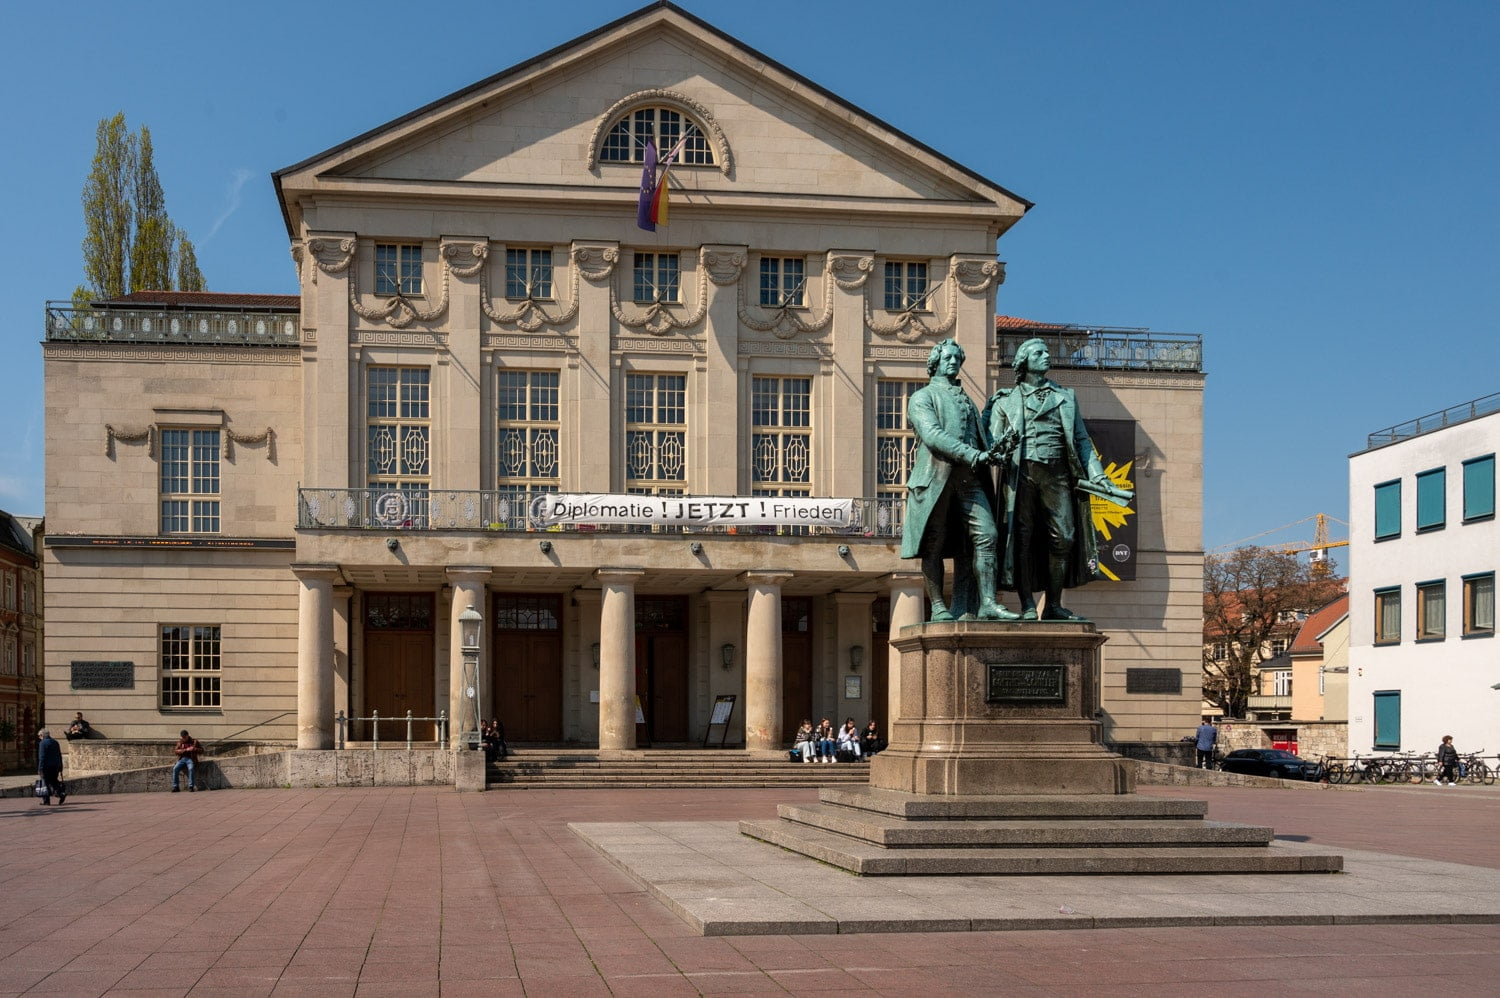 the monument to Goethe and Schiller